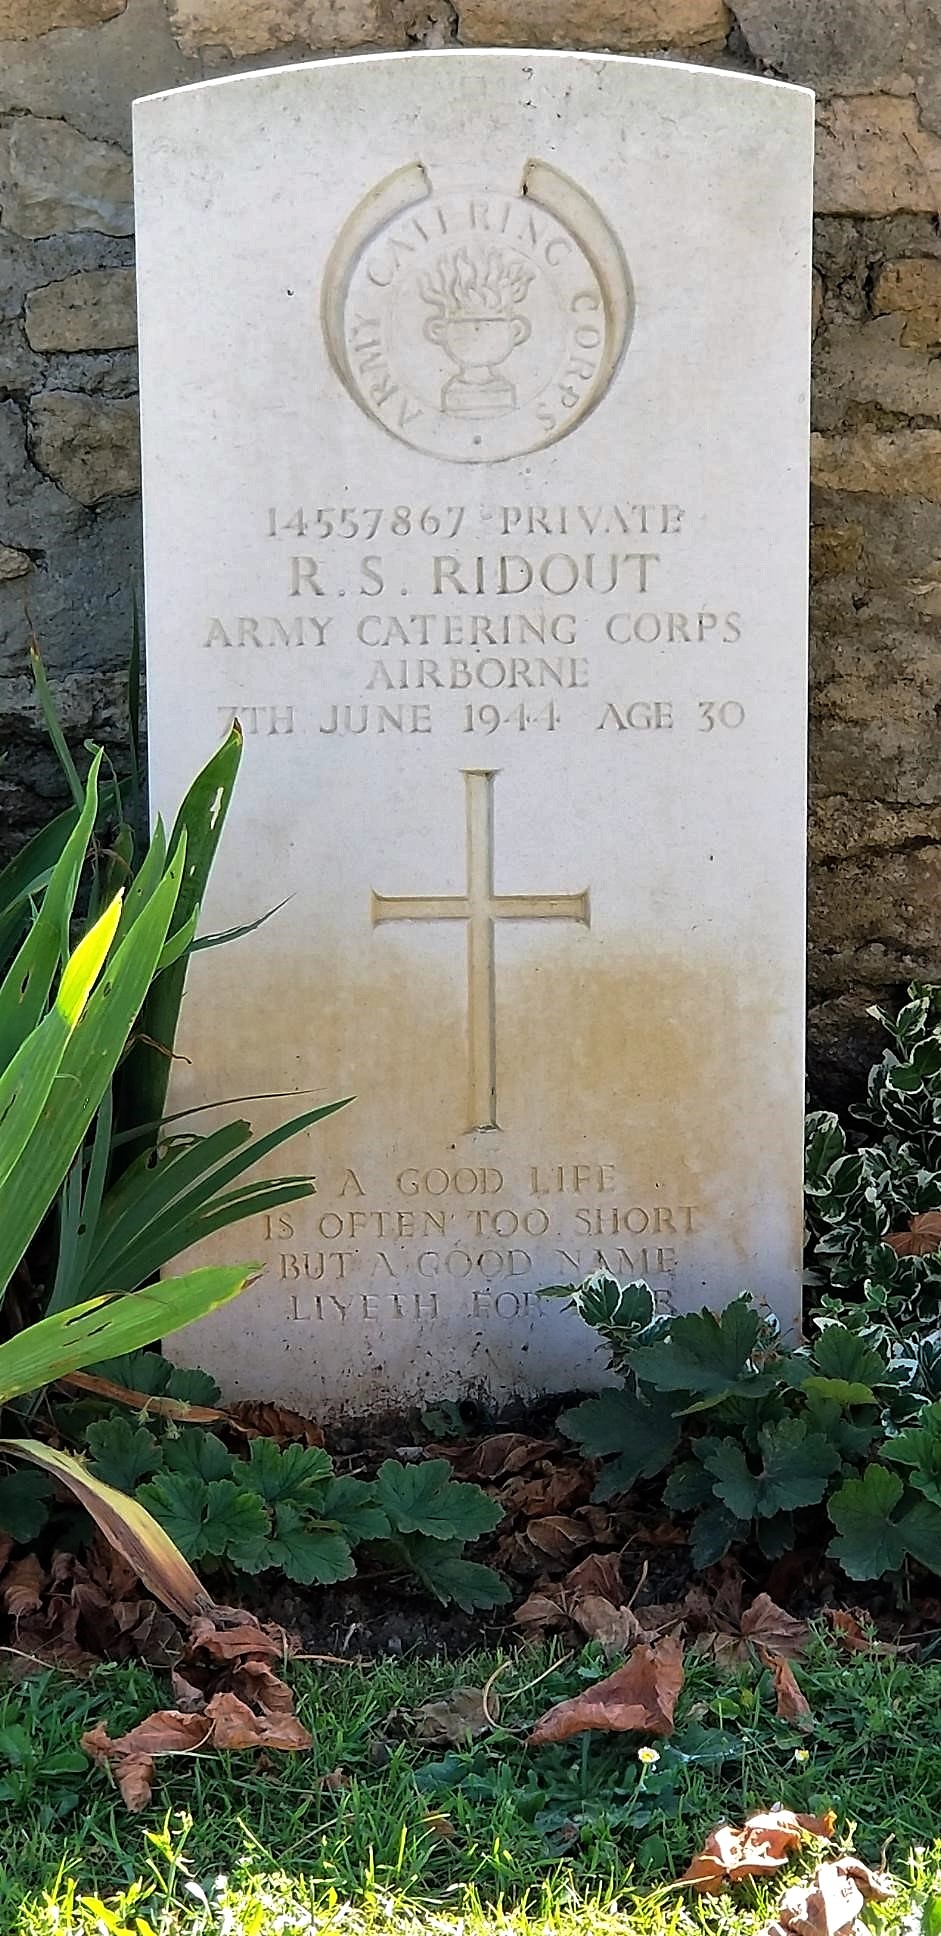 Gravestone for Army Catering Corps veteran at Normandy, France.